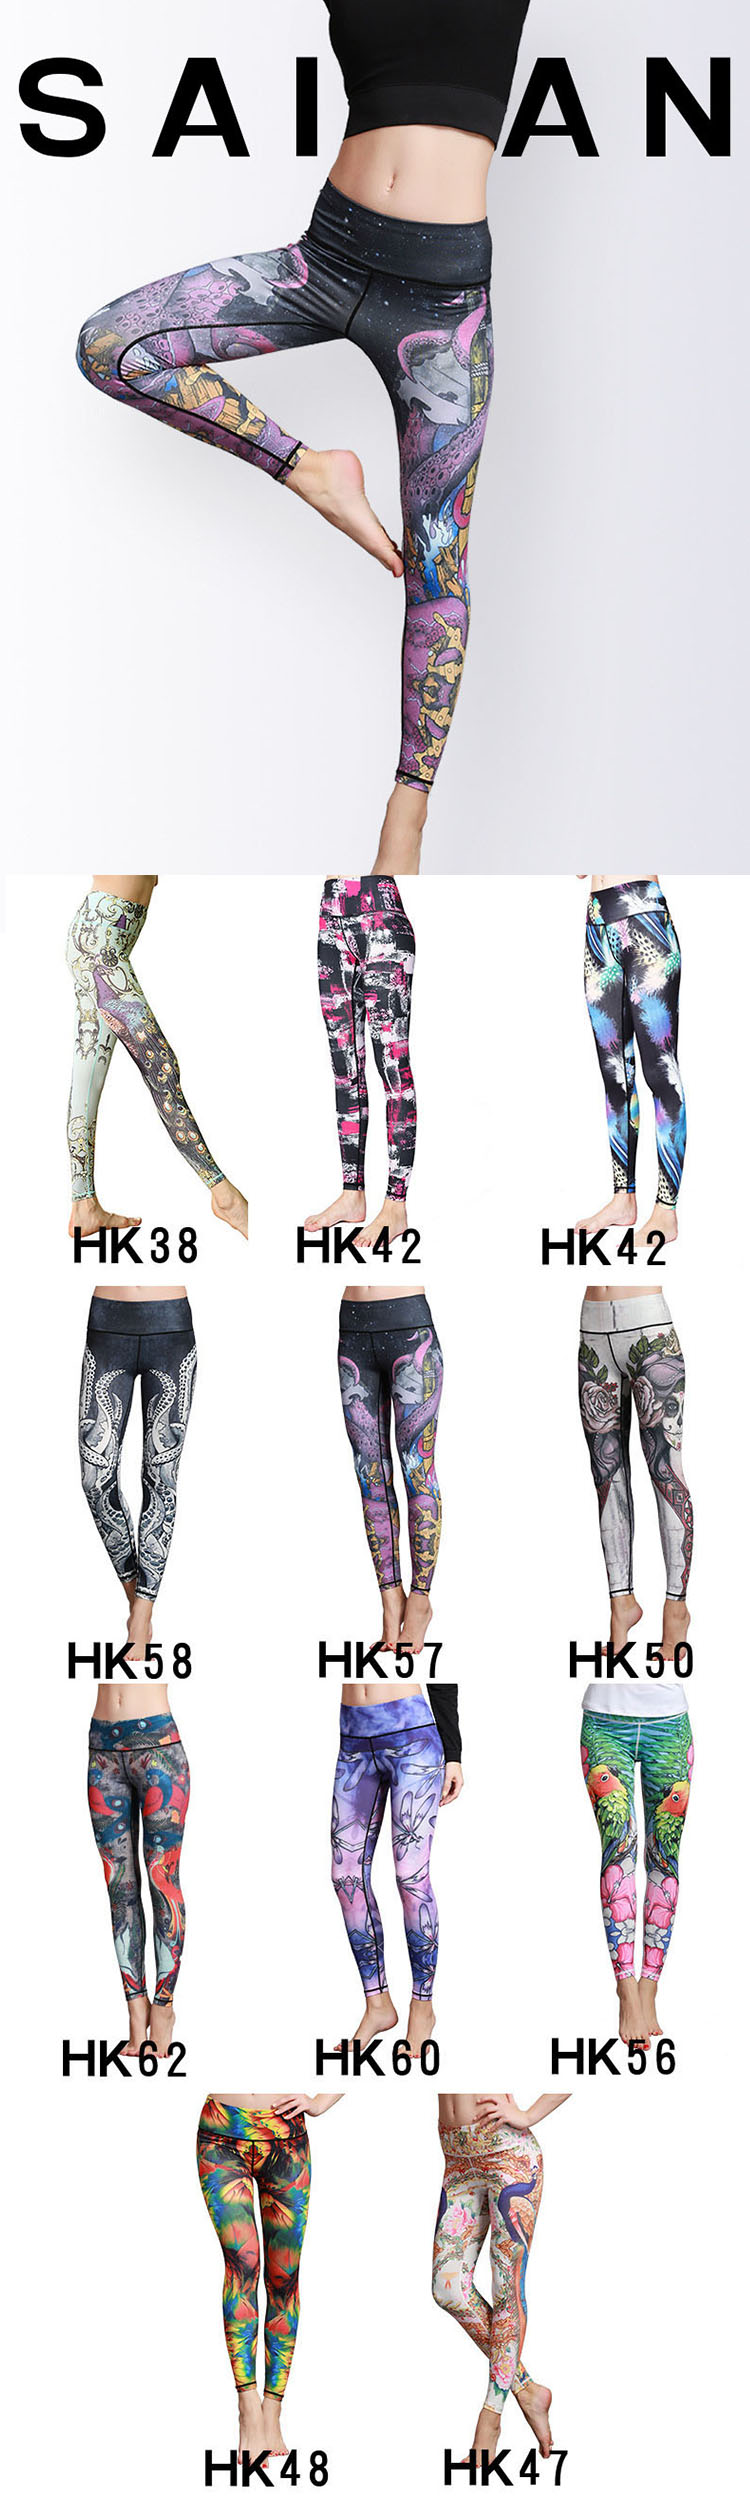 Animal print workout leggings is a relatively common process in women's clothing design